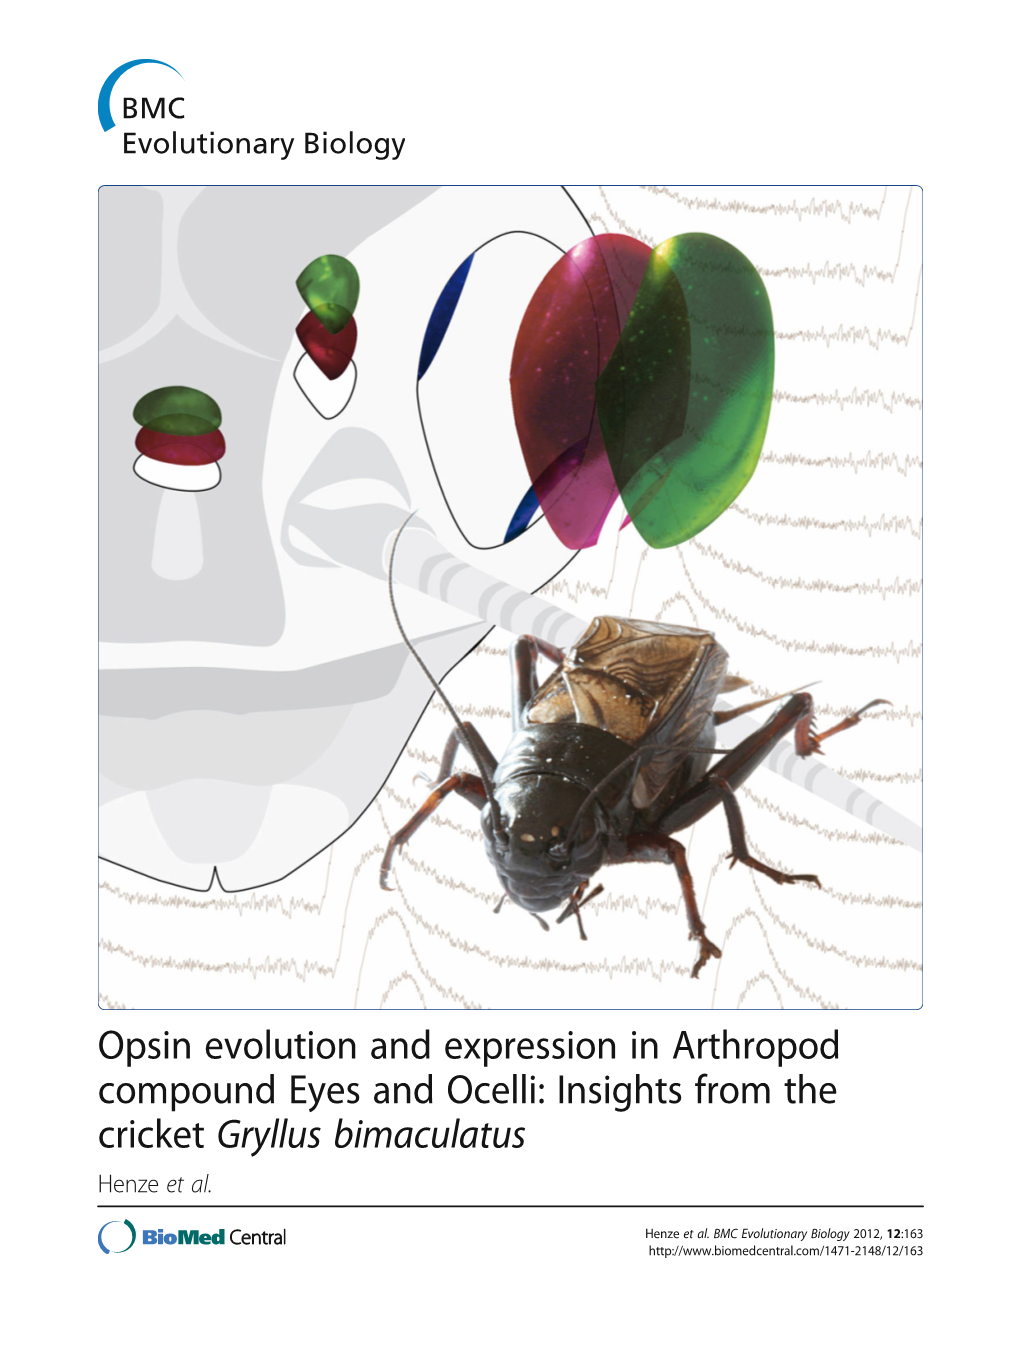 Opsin Evolution and Expression in Arthropod Compound Eyes and Ocelli: Insights from the Cricket Gryllus Bimaculatus Henze Et Al